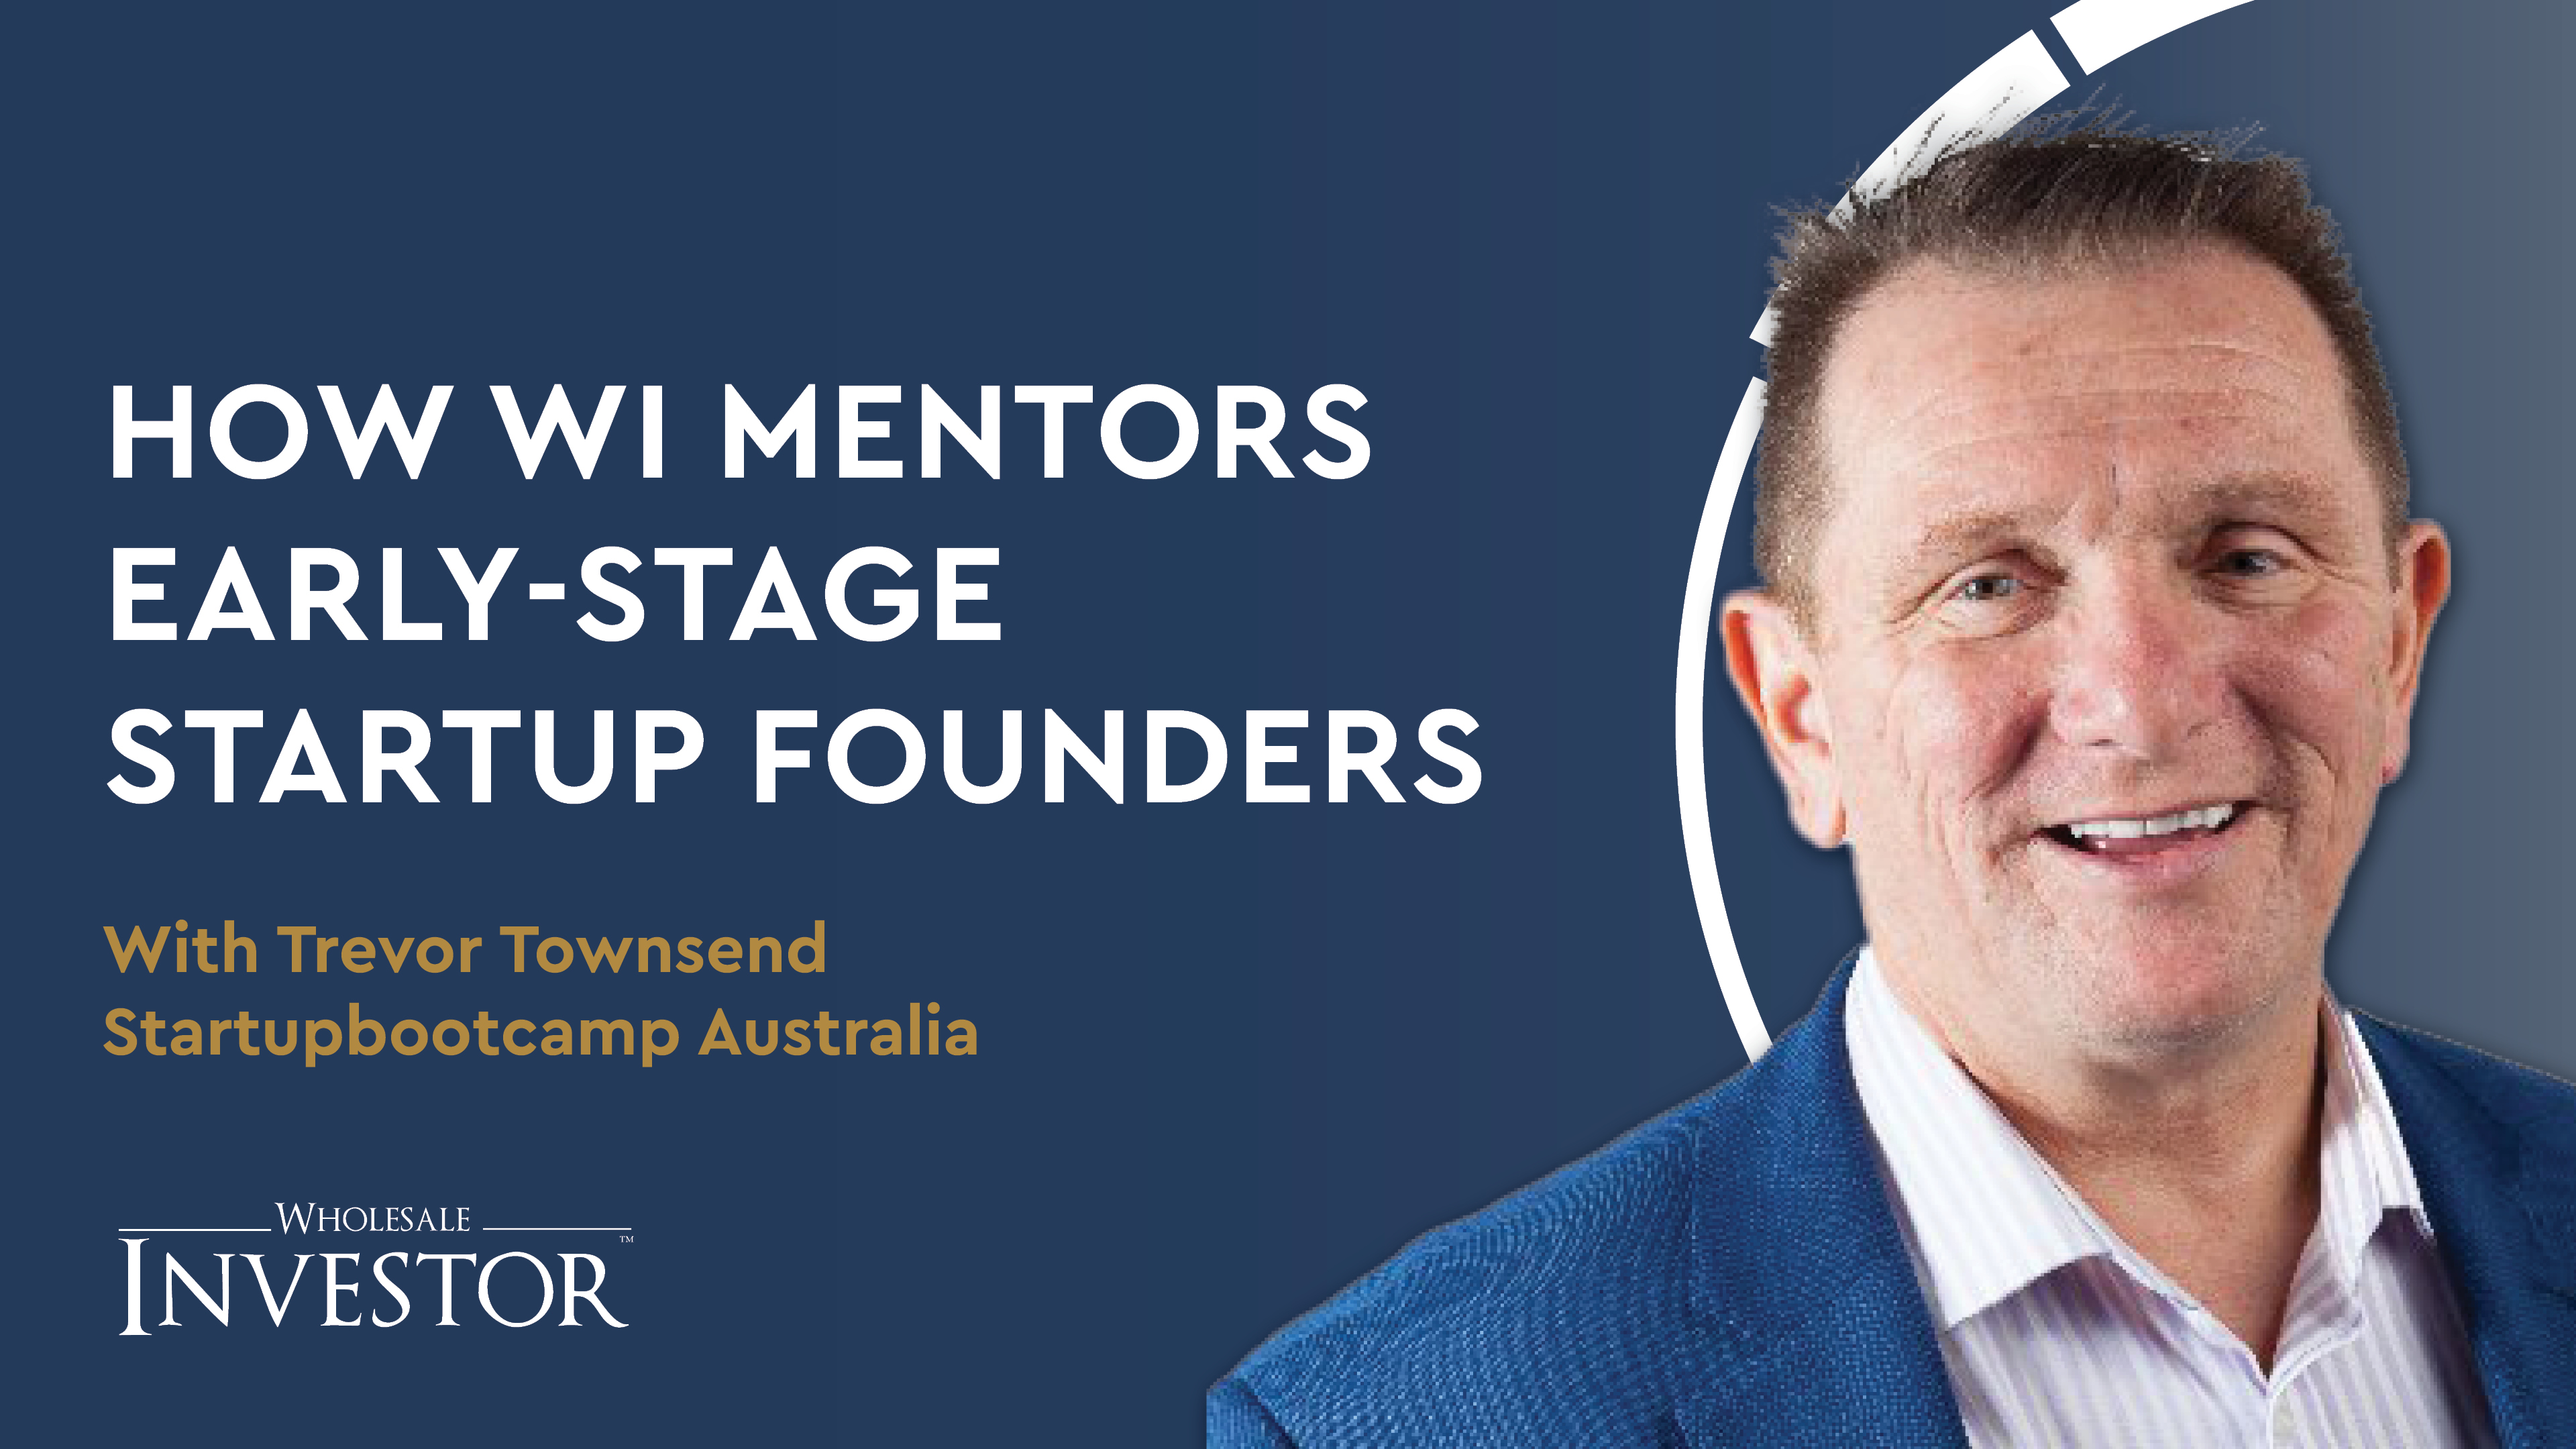 How Wholesale Investor Mentors Early-stage Startup Founders With Startupbootcamp